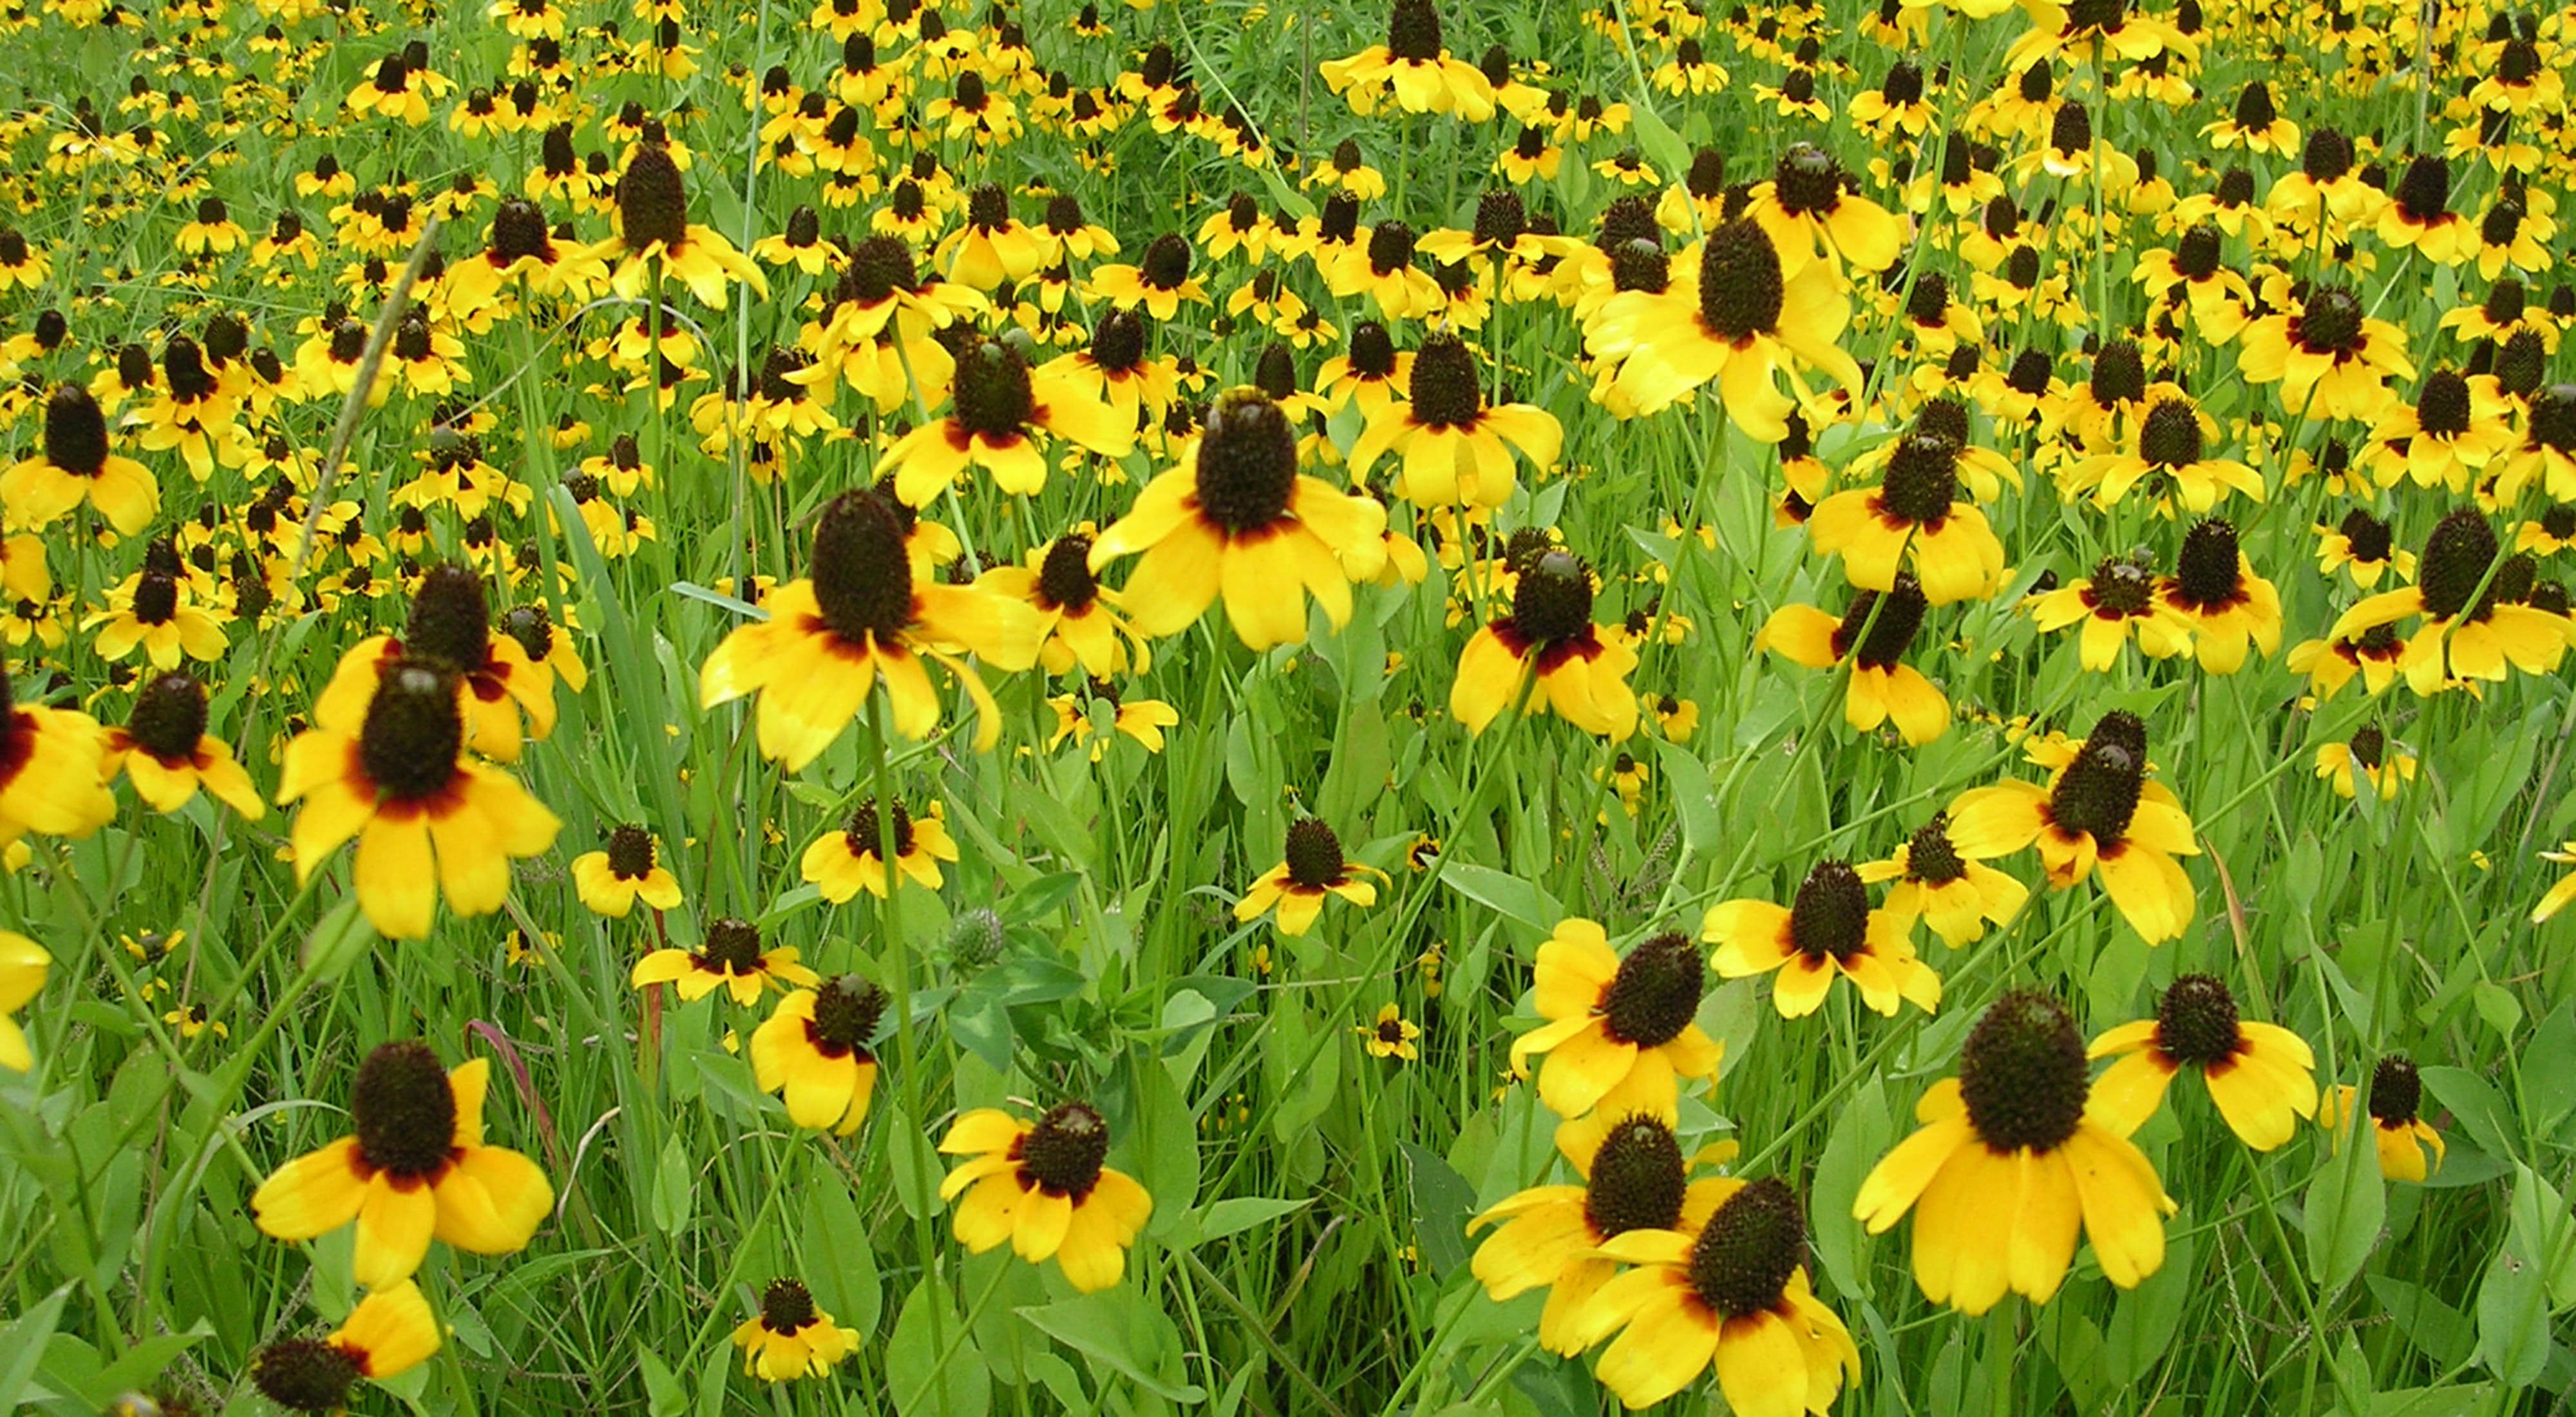 Blackland wildflowers at the 4,885-acre Grandview Prairie Wildlife Management Area in southwest Arkansas. Grandview is part of the state's rare blacklands ecosystem the Conservancy works to restore and conserve.